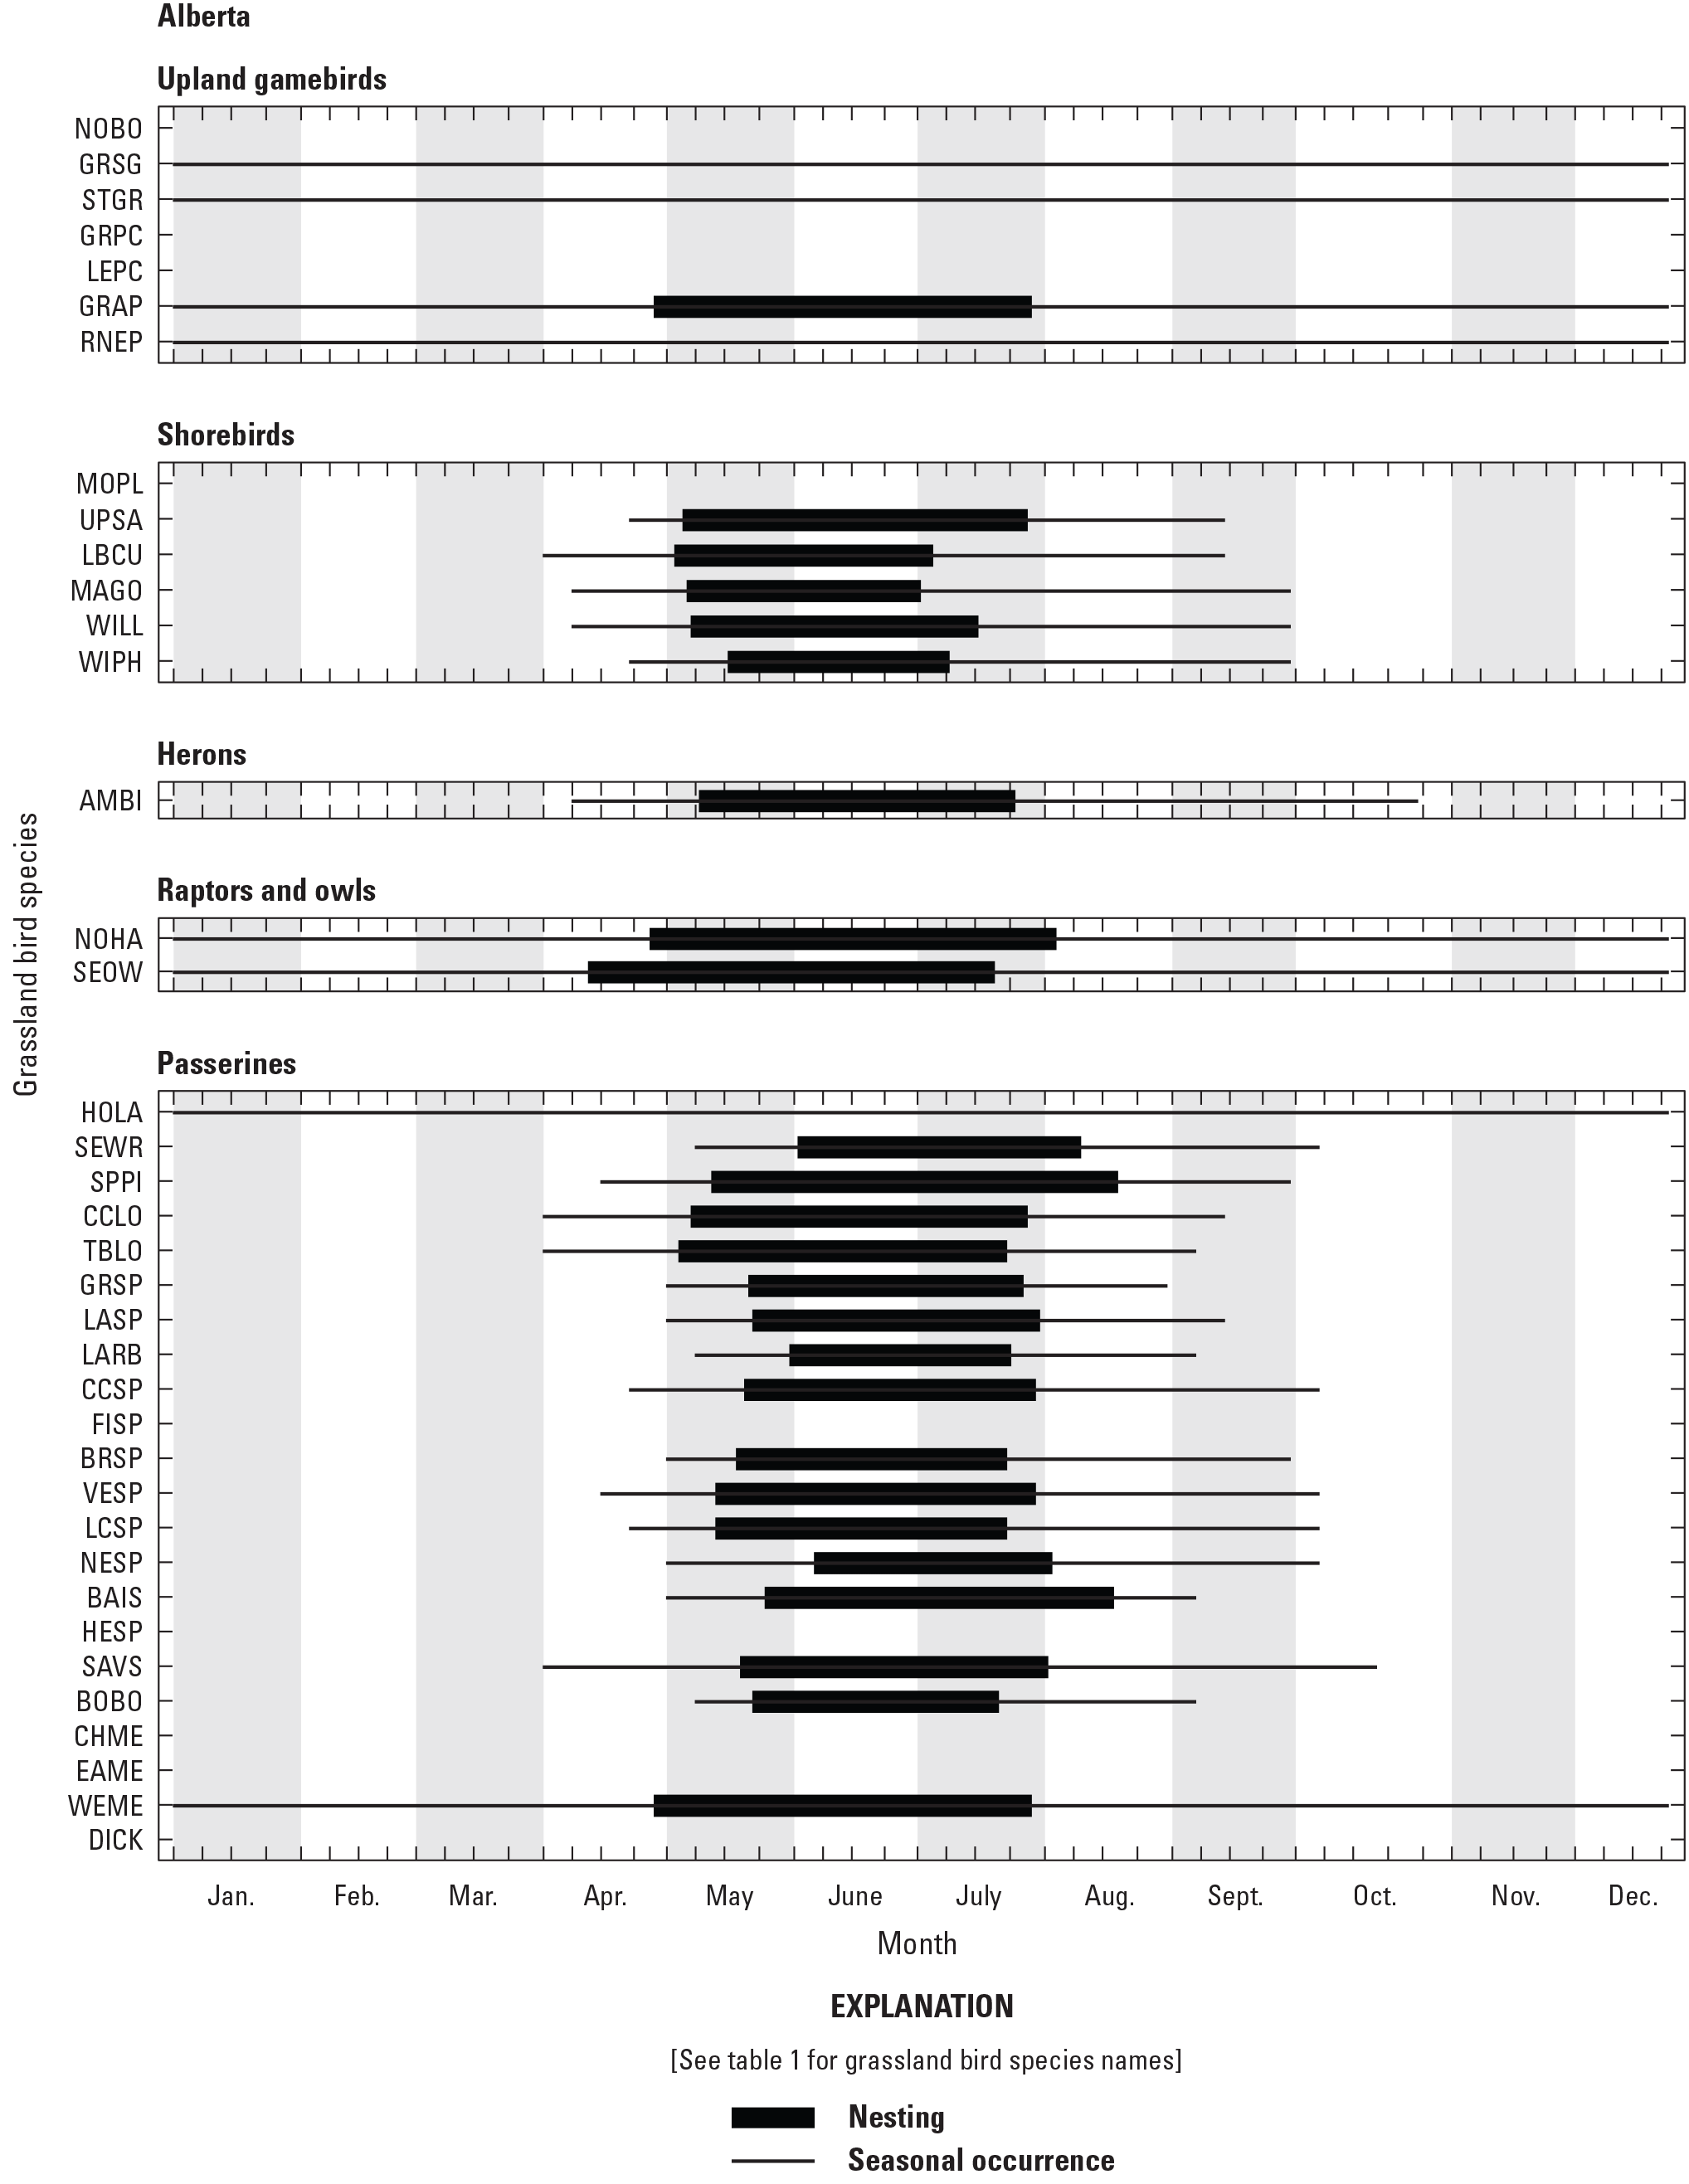 Figure showing seasonal occurrence and nesting phenology for 38 grassland bird species
               in Alberta, Canada.